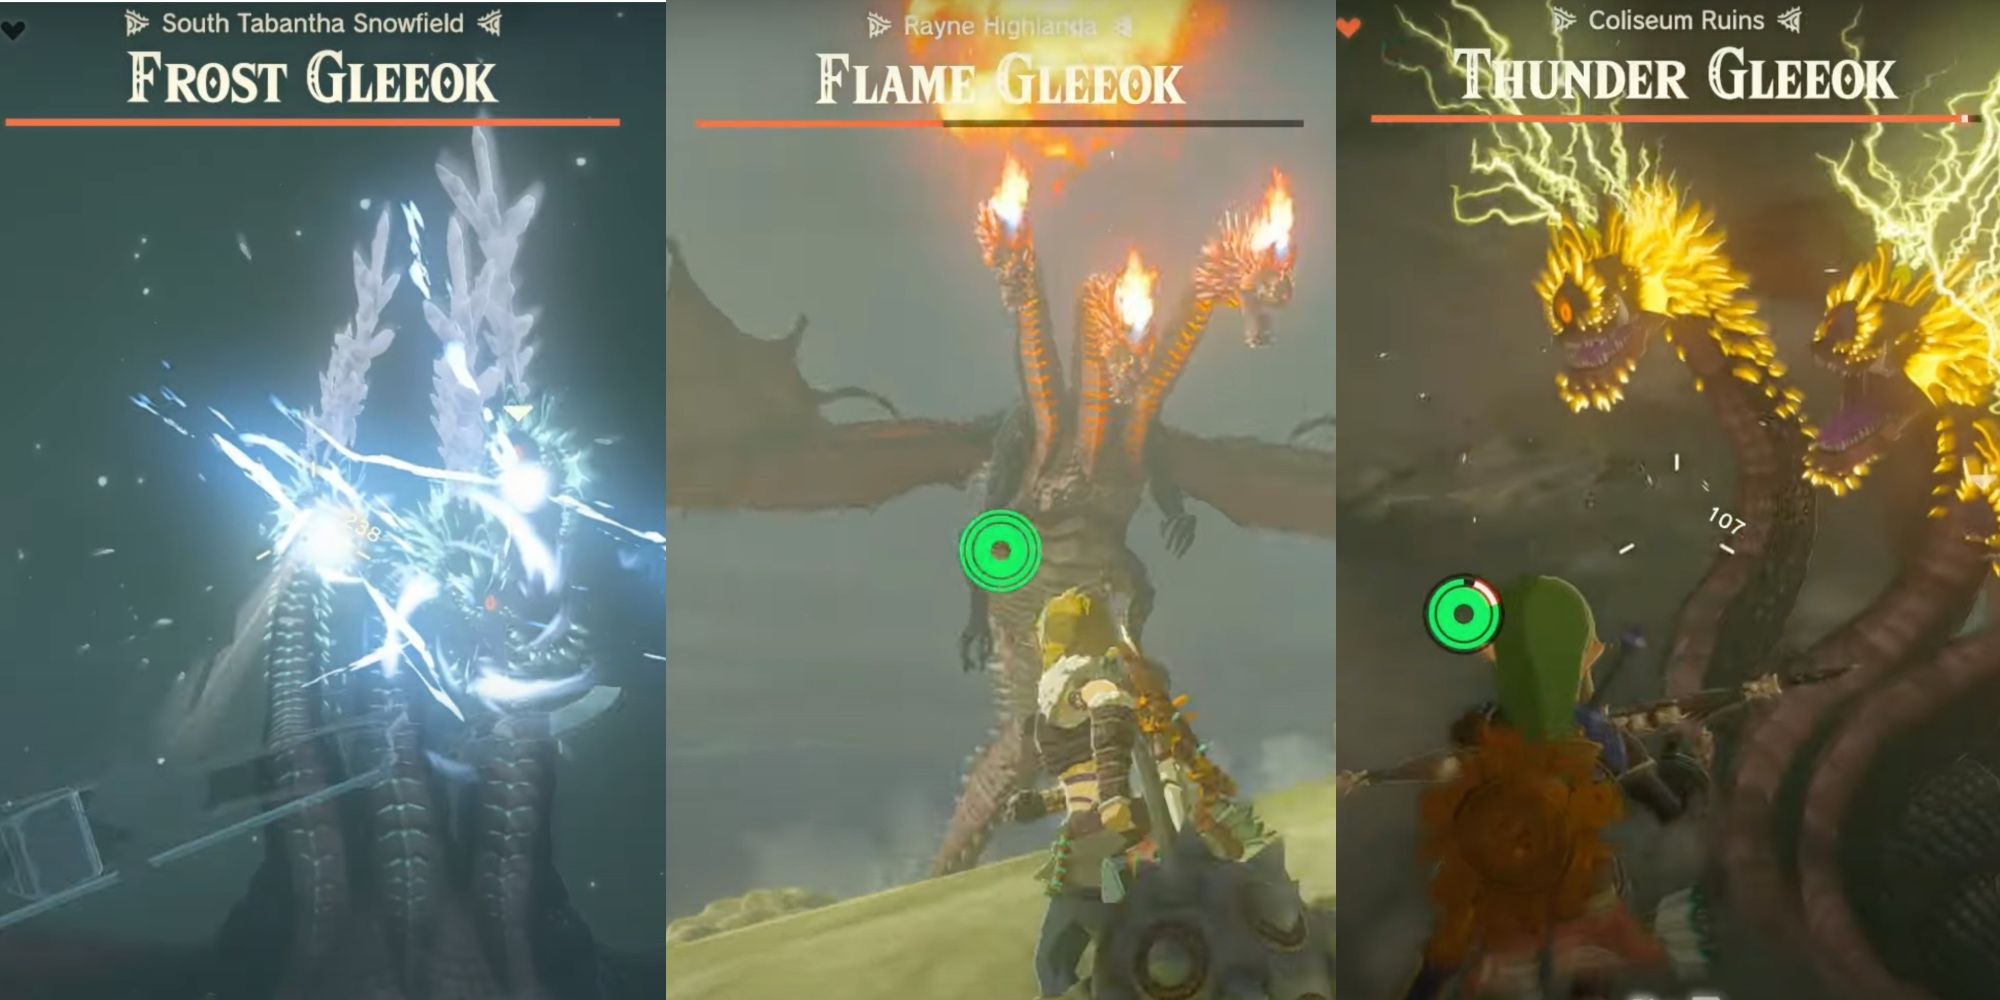 The Frost Gleeok breathes ice on the left. The Fire Gleeok flies high up in the center. The Thunder Gleeok rears up as Link approaches in The Legend Of Zelda: Tears Of The Kingdom.